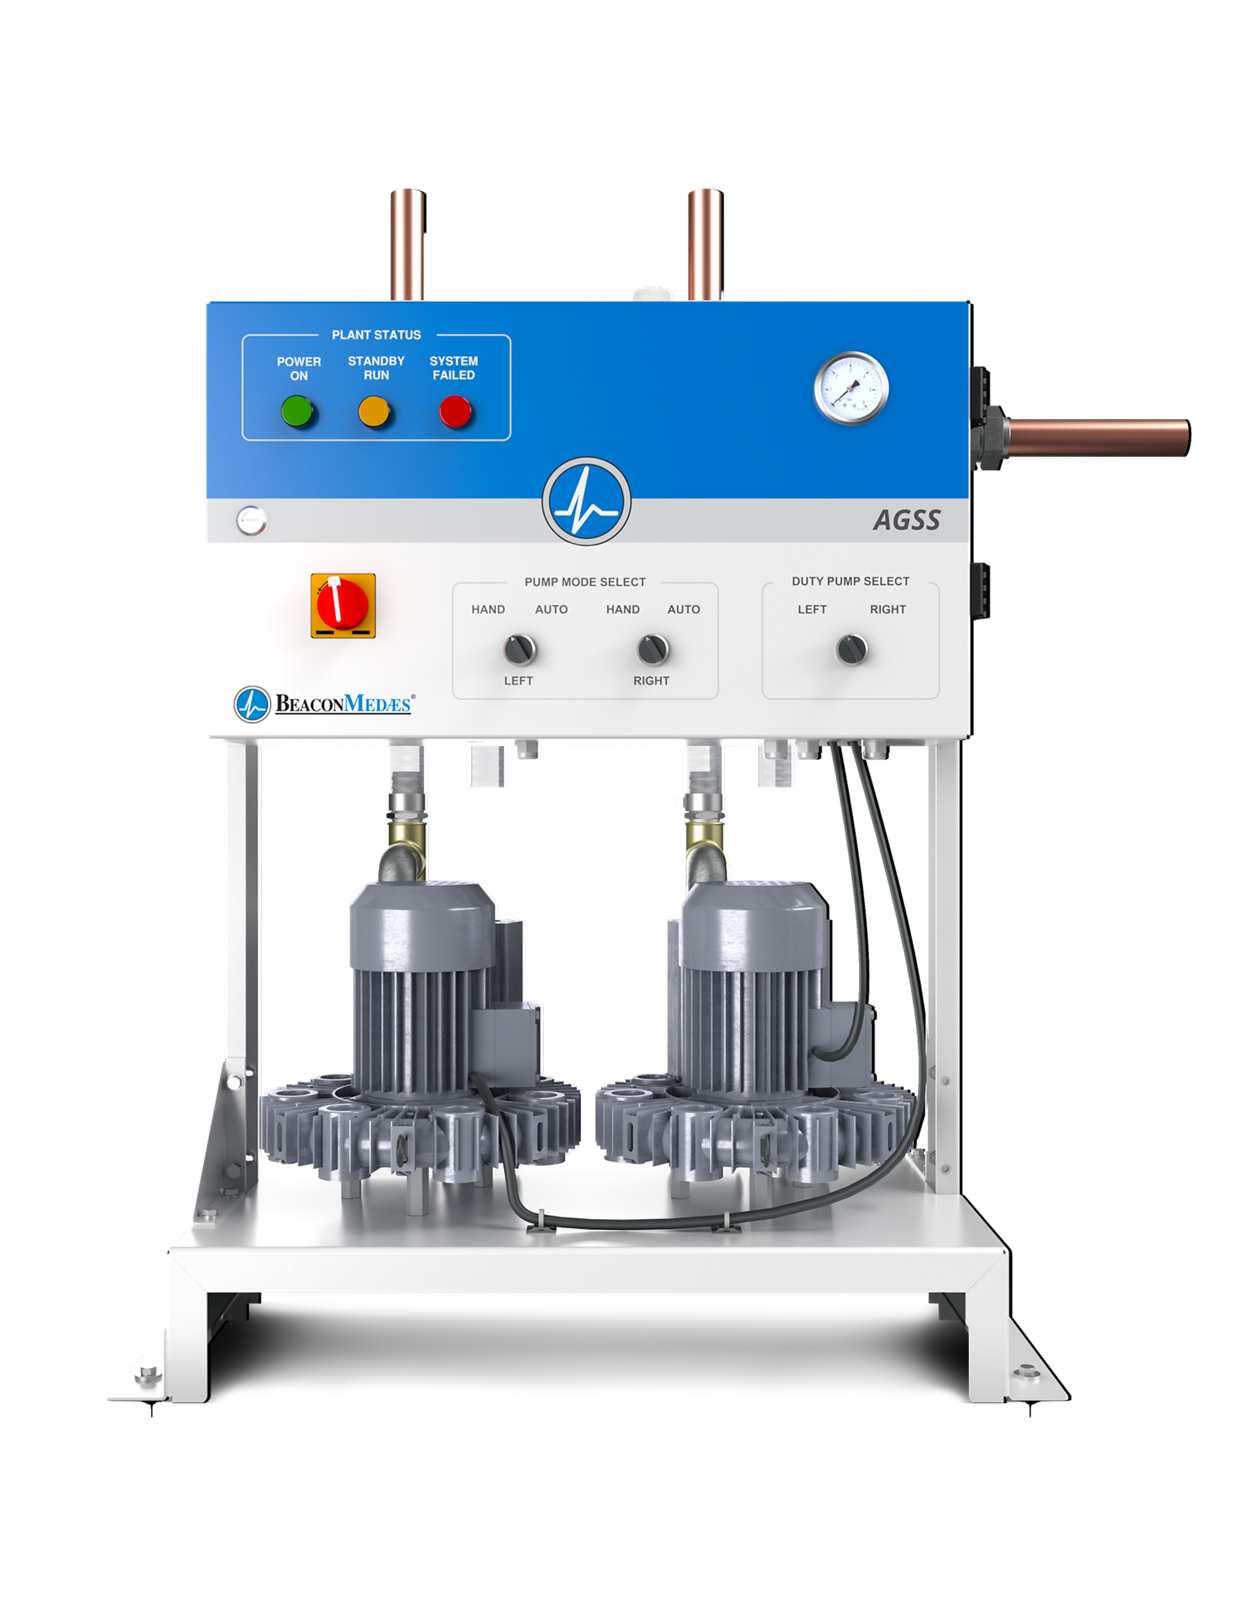 Suppliers of Anesthetic Gas Scavenging System (AGSS) UK